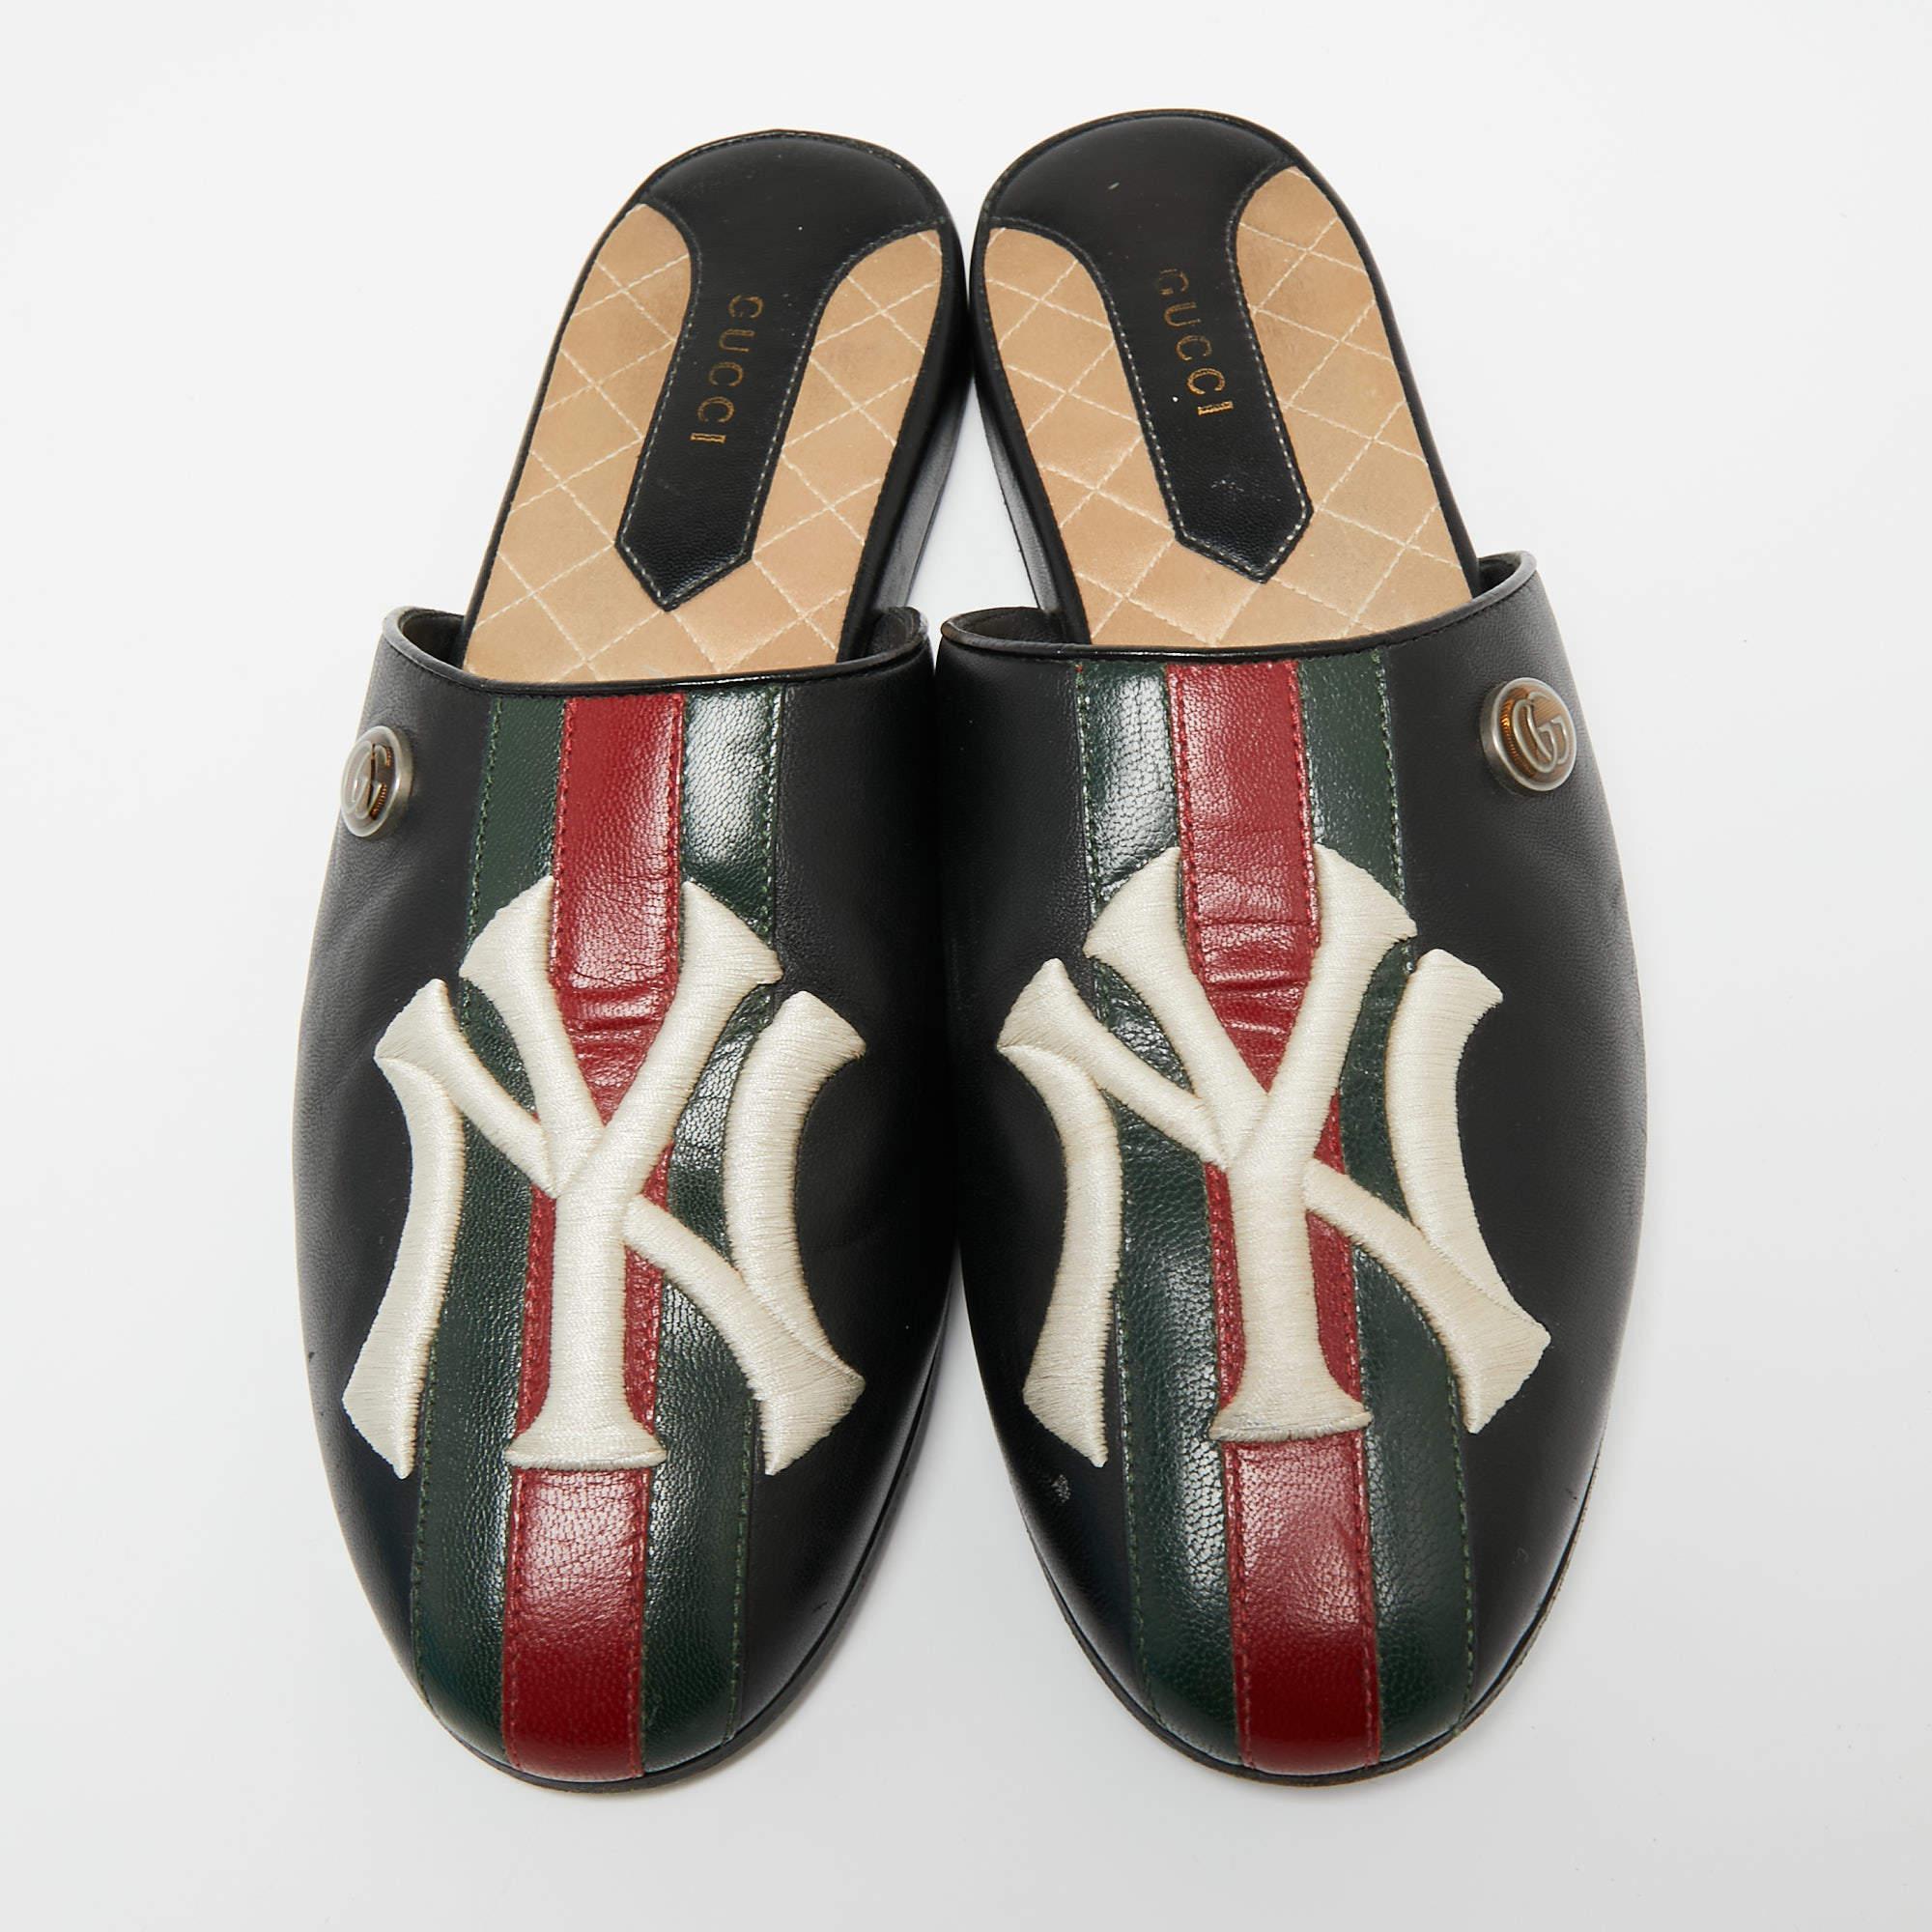 The Yankees collection was created by Gucci in collaboration with Major League Baseball. These mules come created from leather with a 'NY' patch on the vamps and they are easy to wear with a slip-on fitting.

Includes: Info Booklet, Original Box

